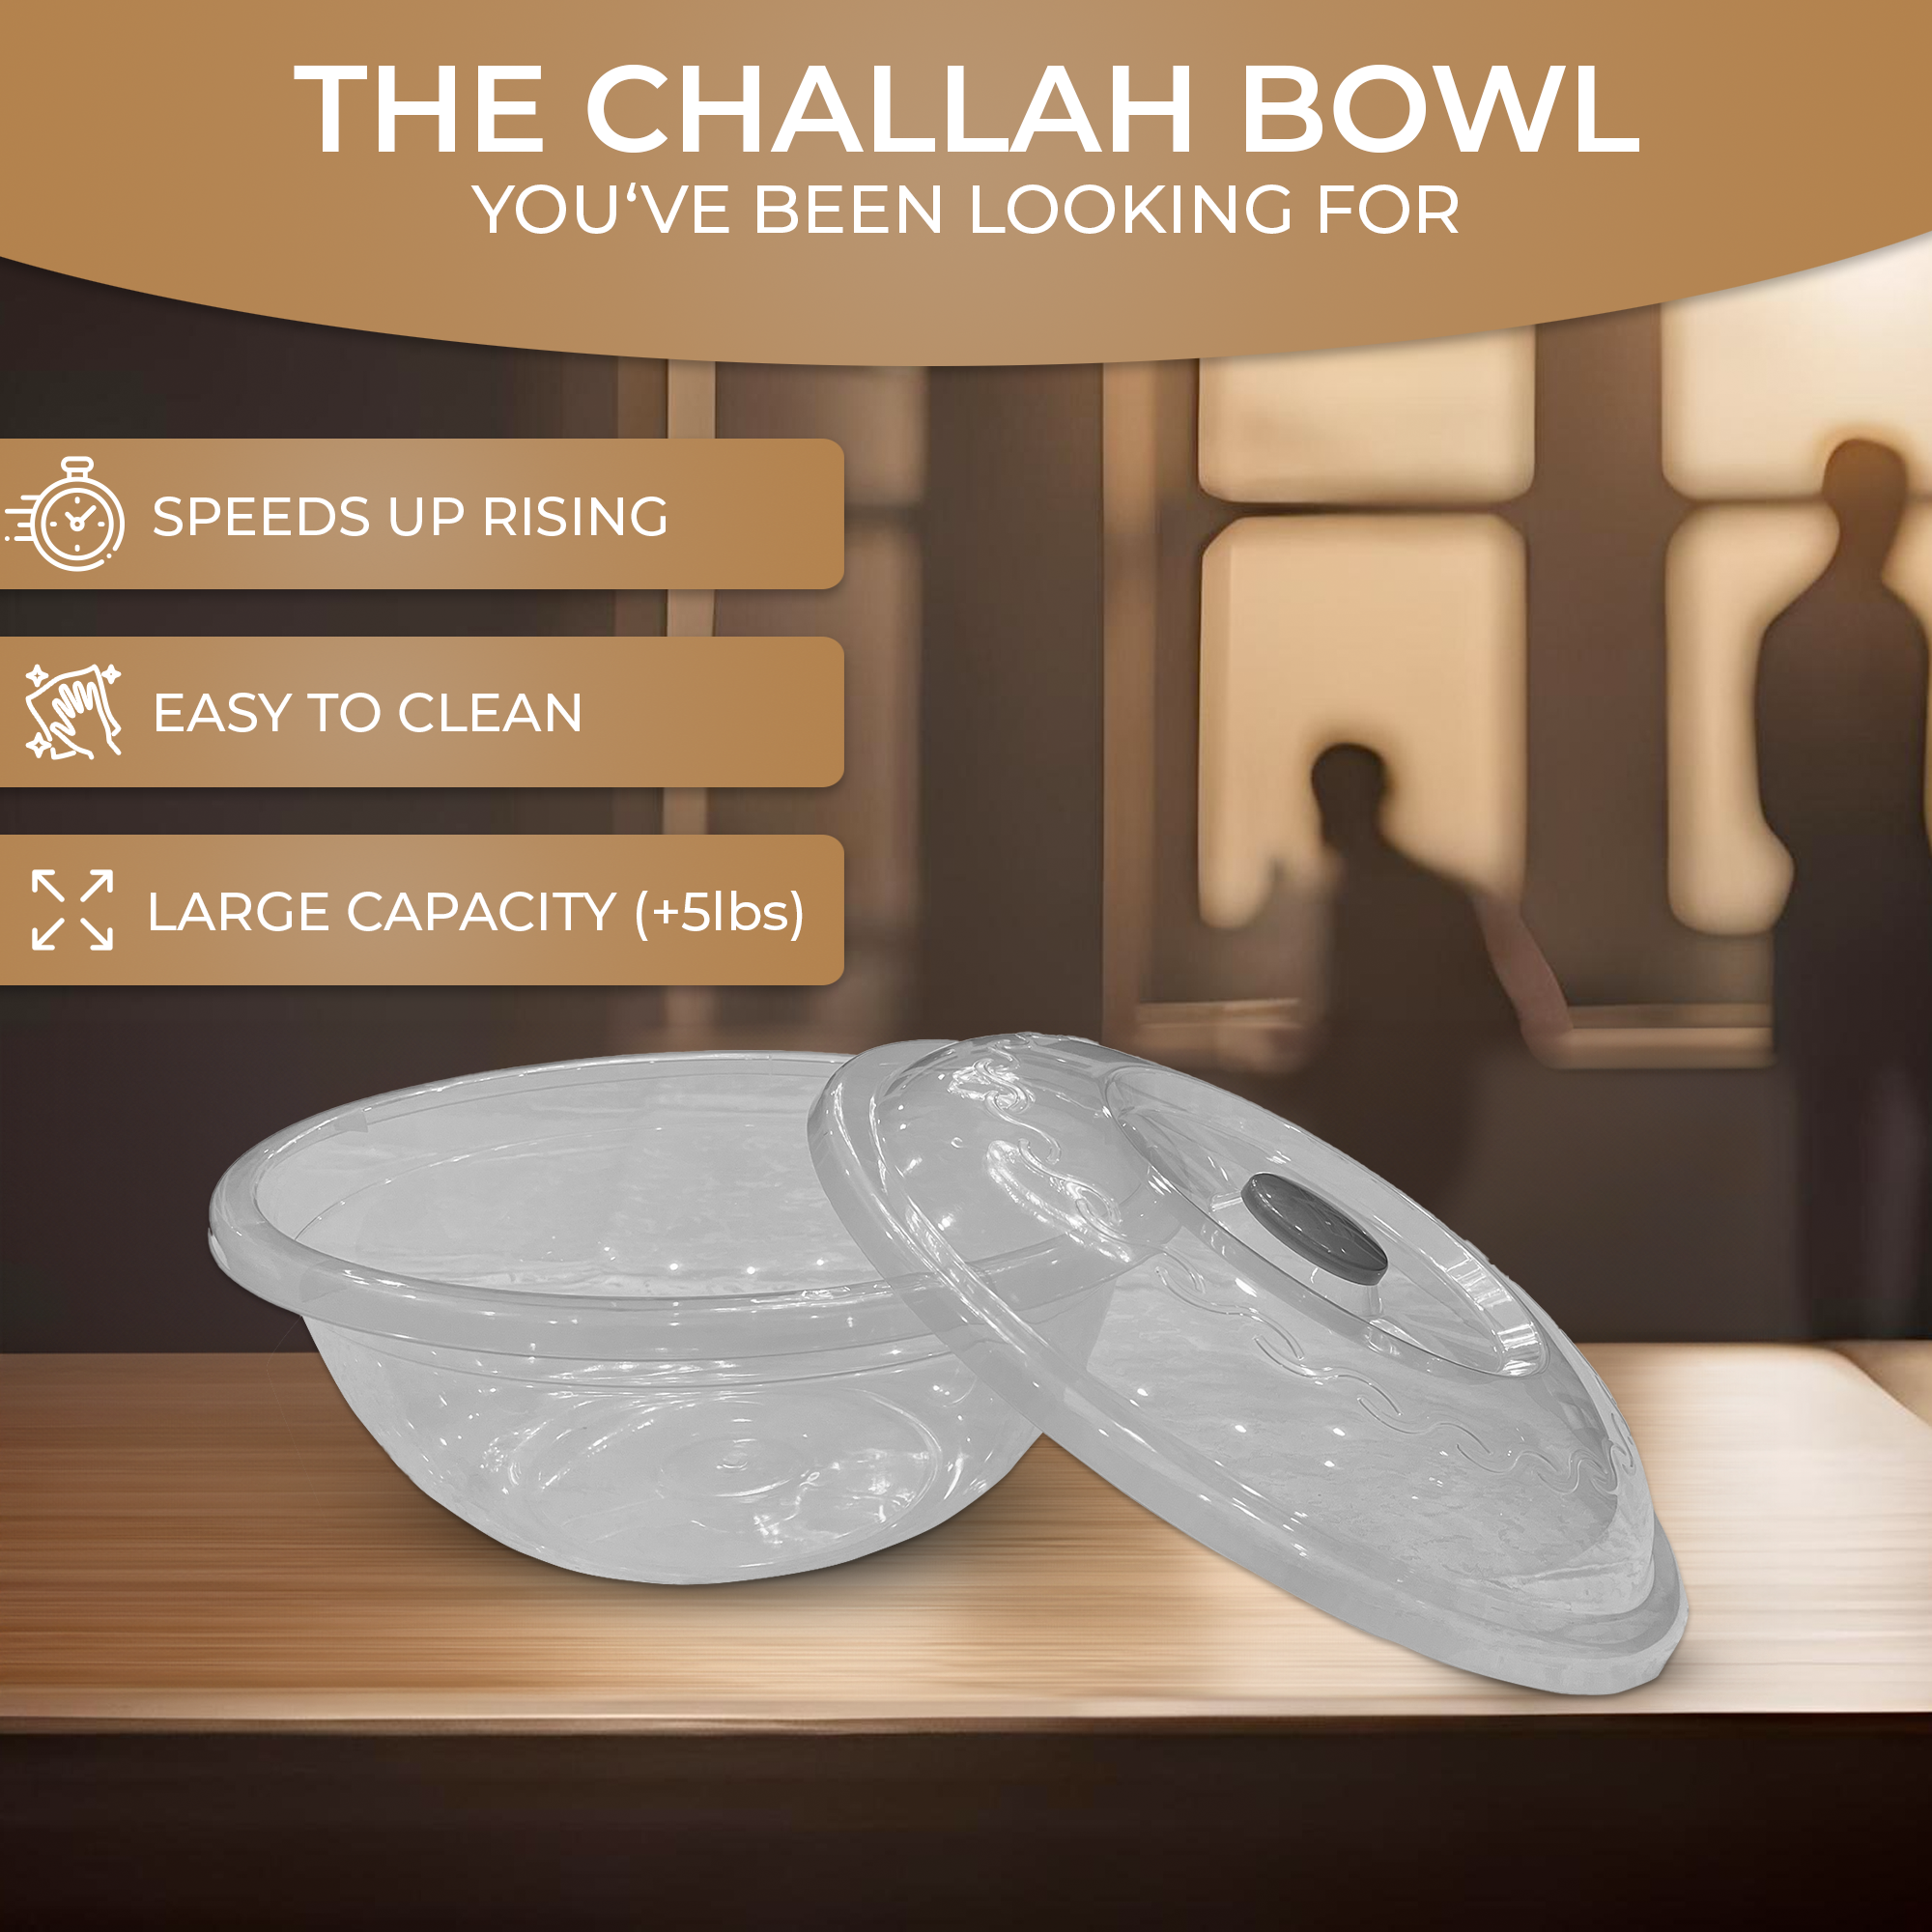 The Challah Bowl - 15 Liters for 6 lbs of flour